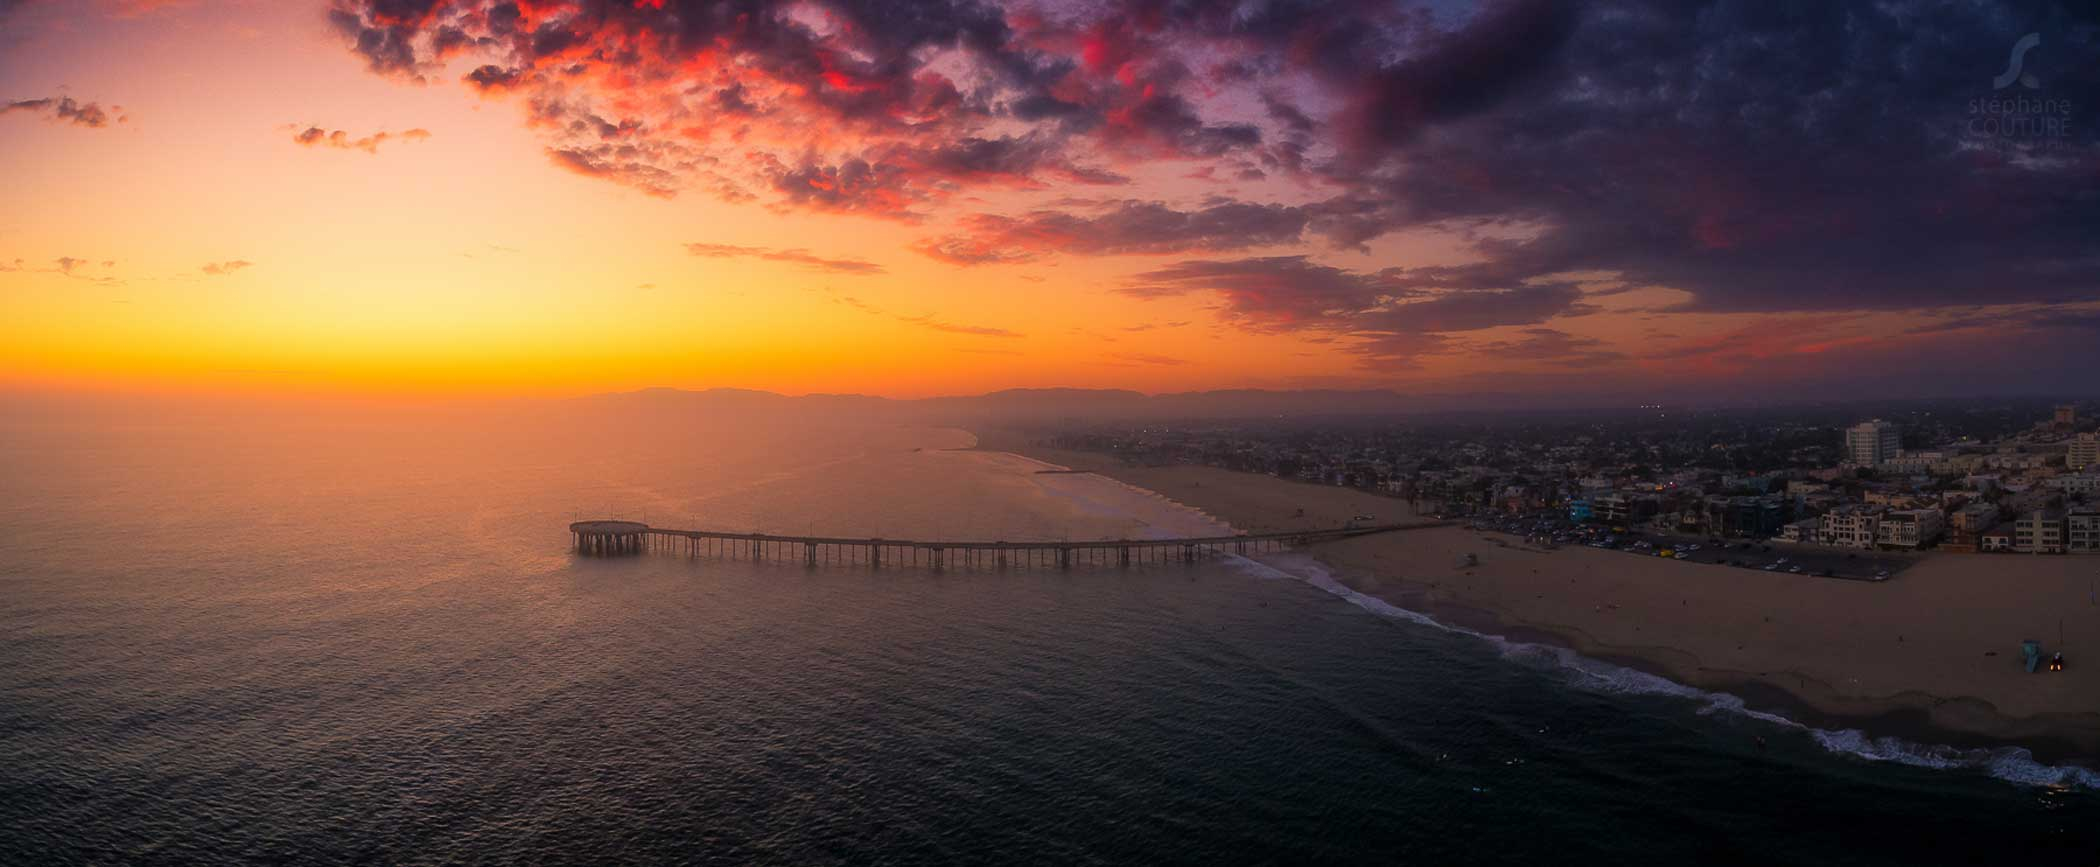 Sunset over Venice Pier in Los Angeles. (Stephane Couture. Courtesy of <a href="https://www.skypixel.com/photos/over-venice-beach-at-sunset" target="_blank">SkyPixel</a>.)